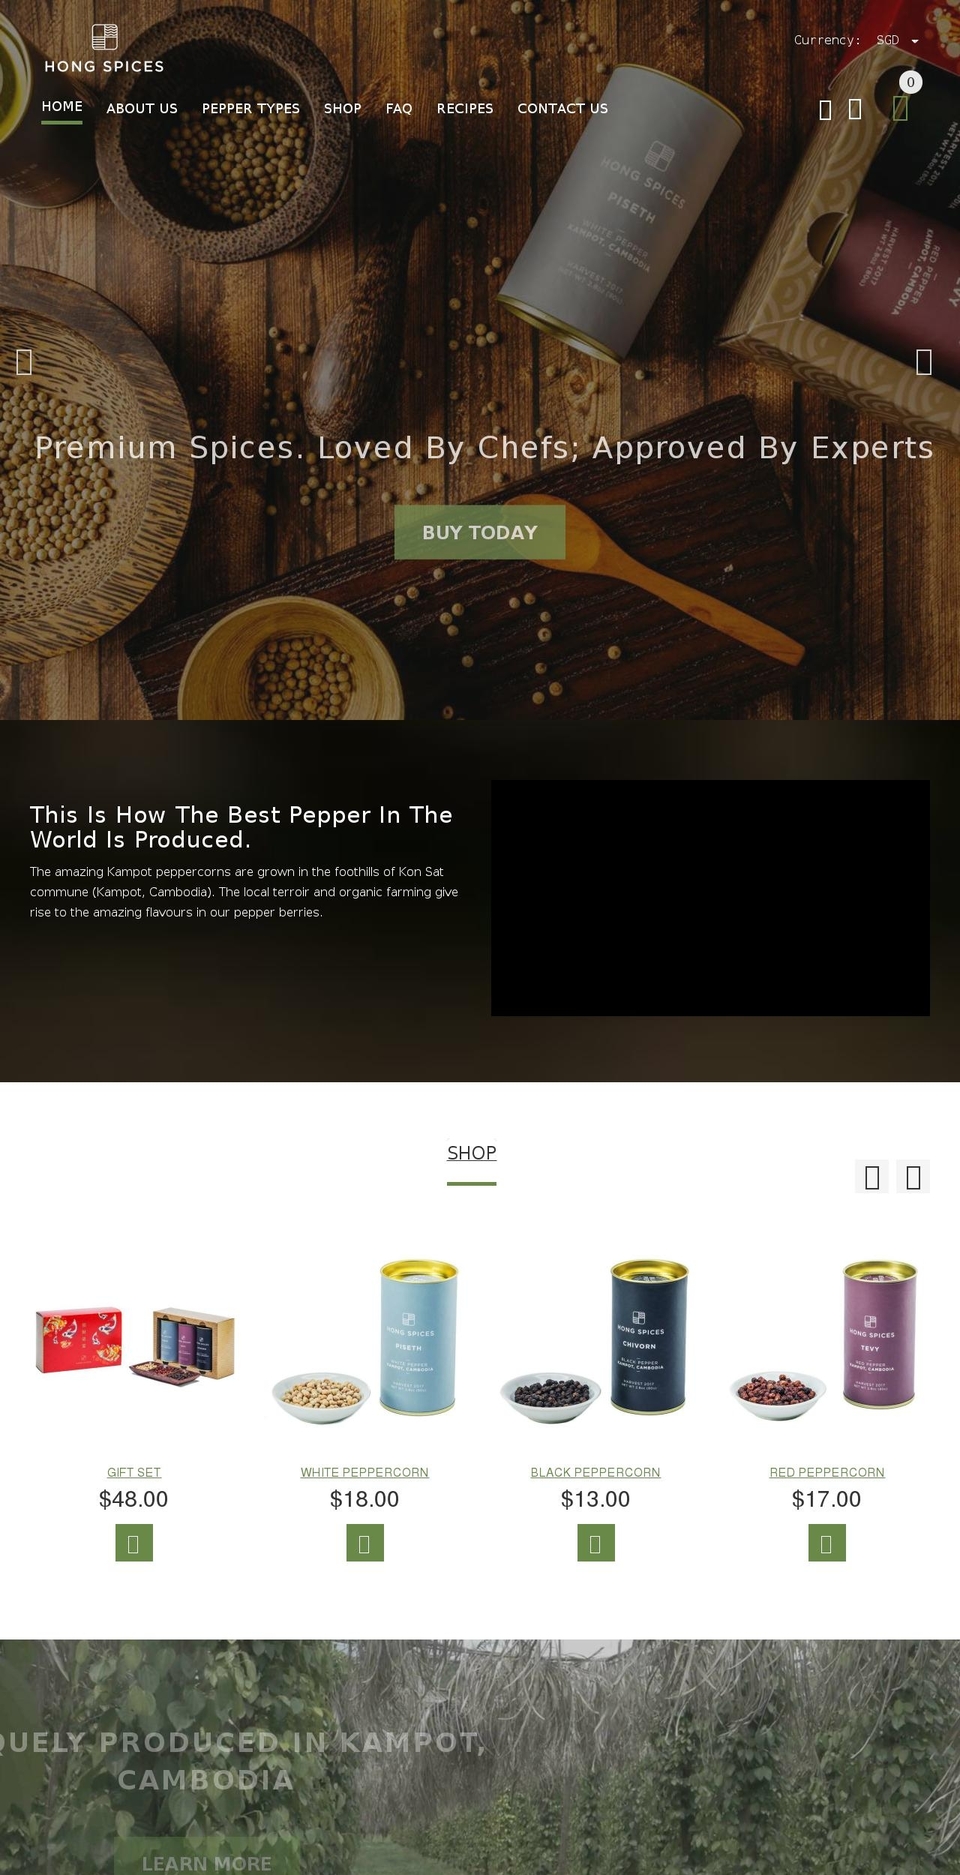 YourStore Shopify theme site example hongspices.com